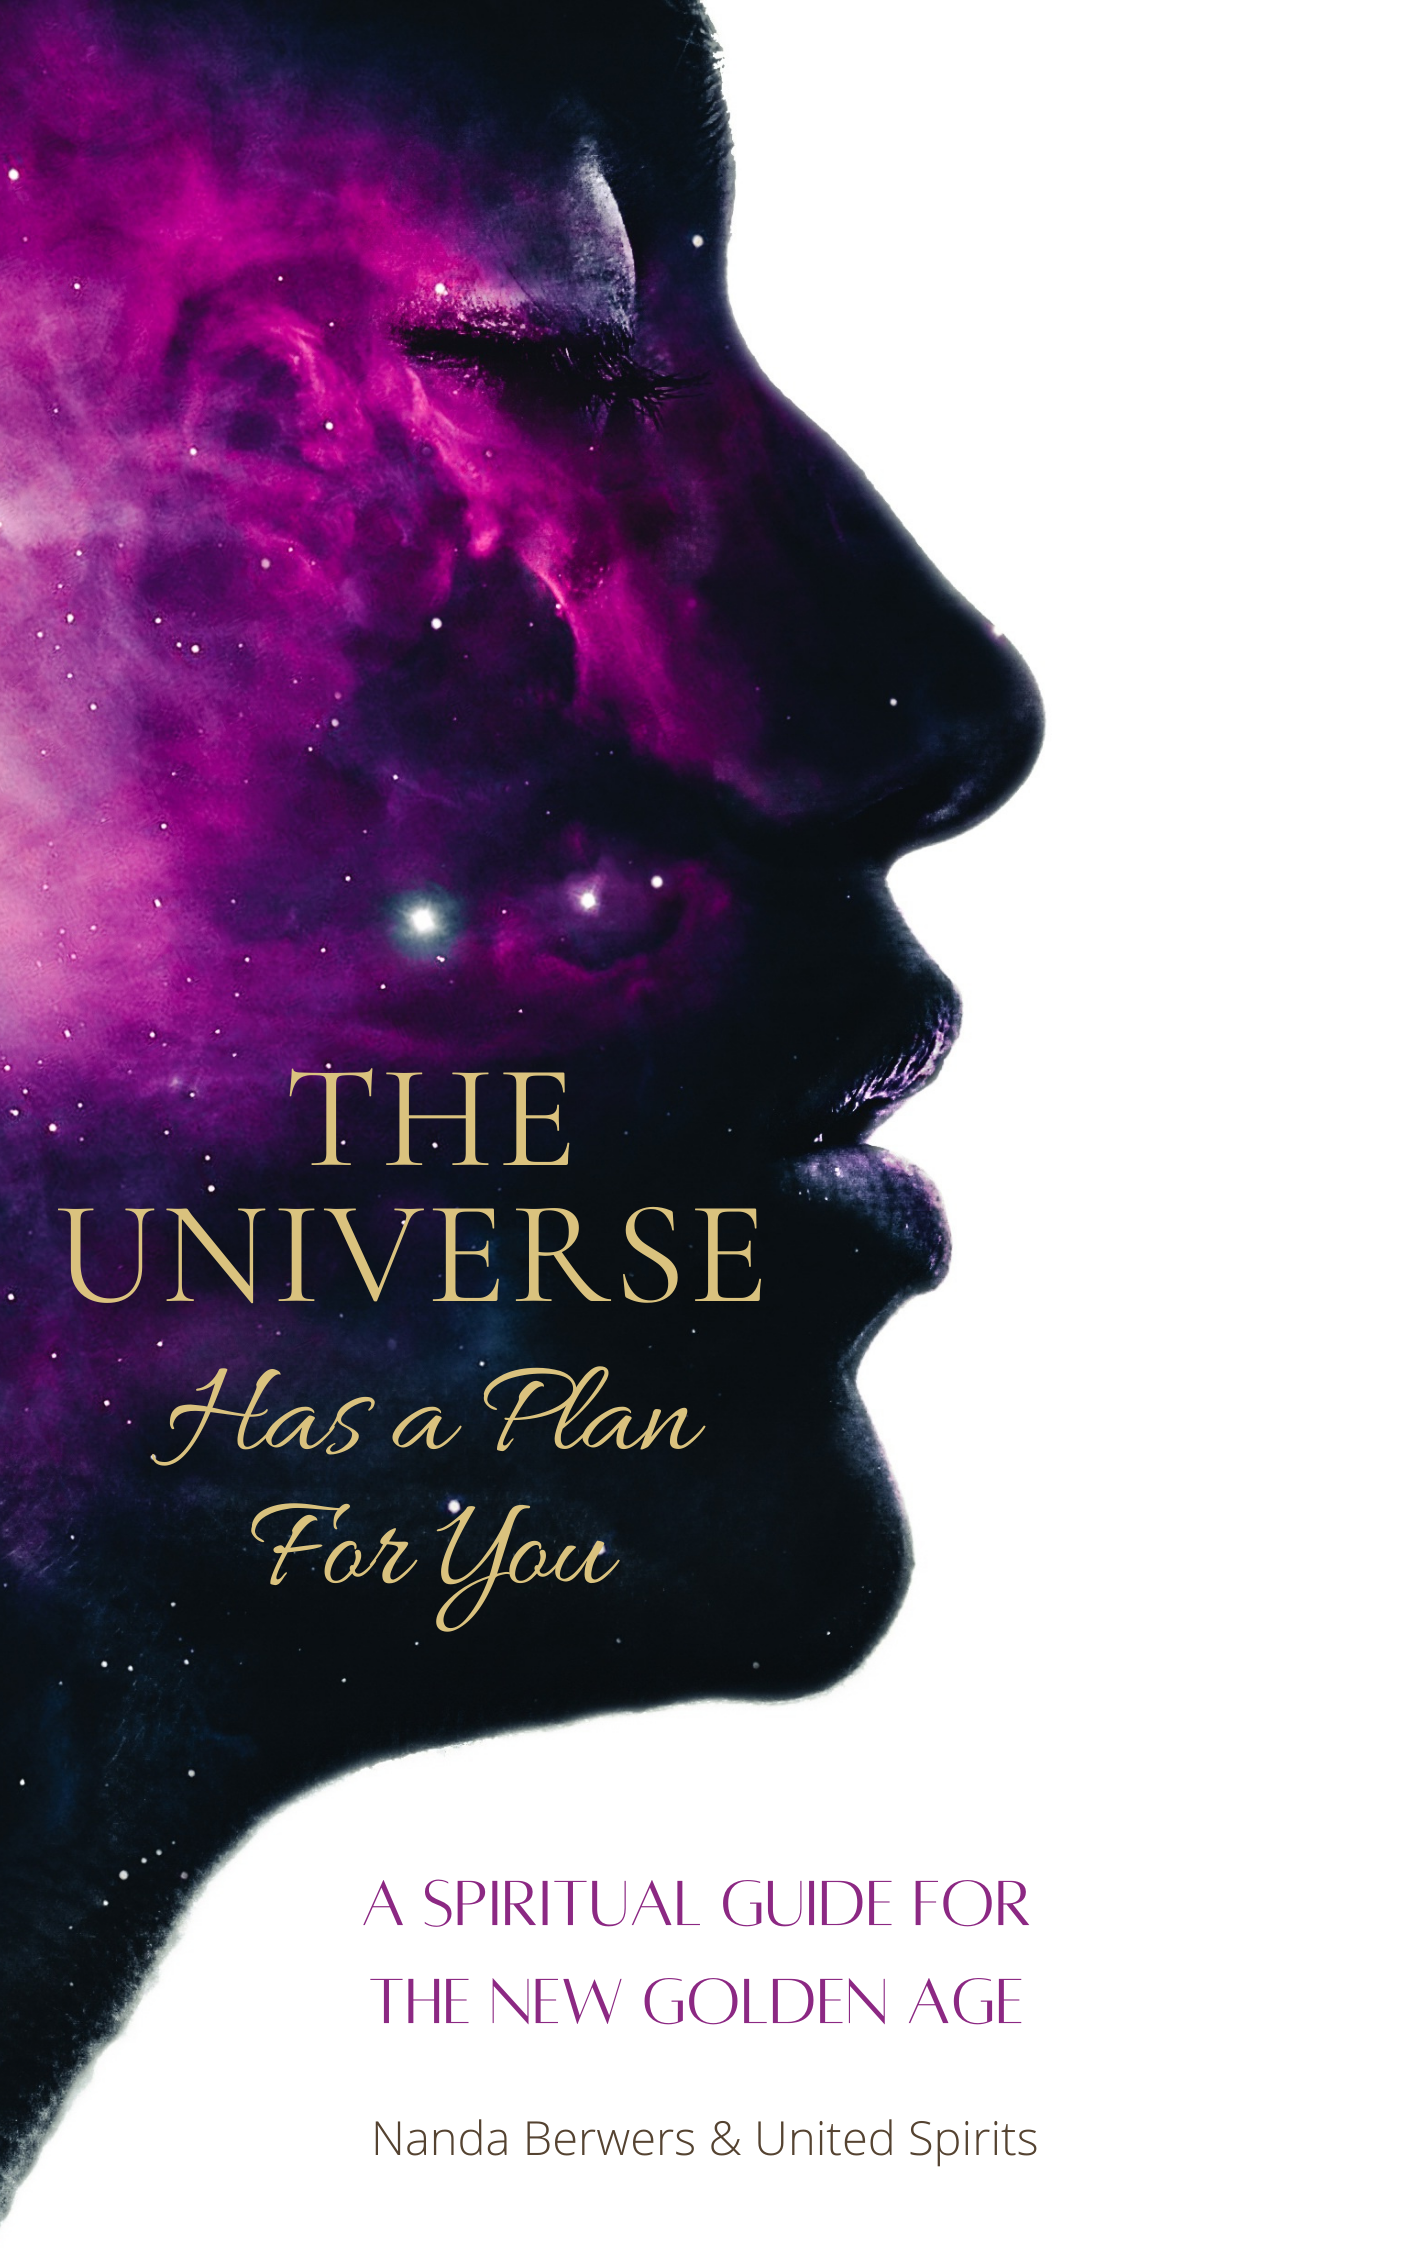 The Universe has a Plan for You - United spirits